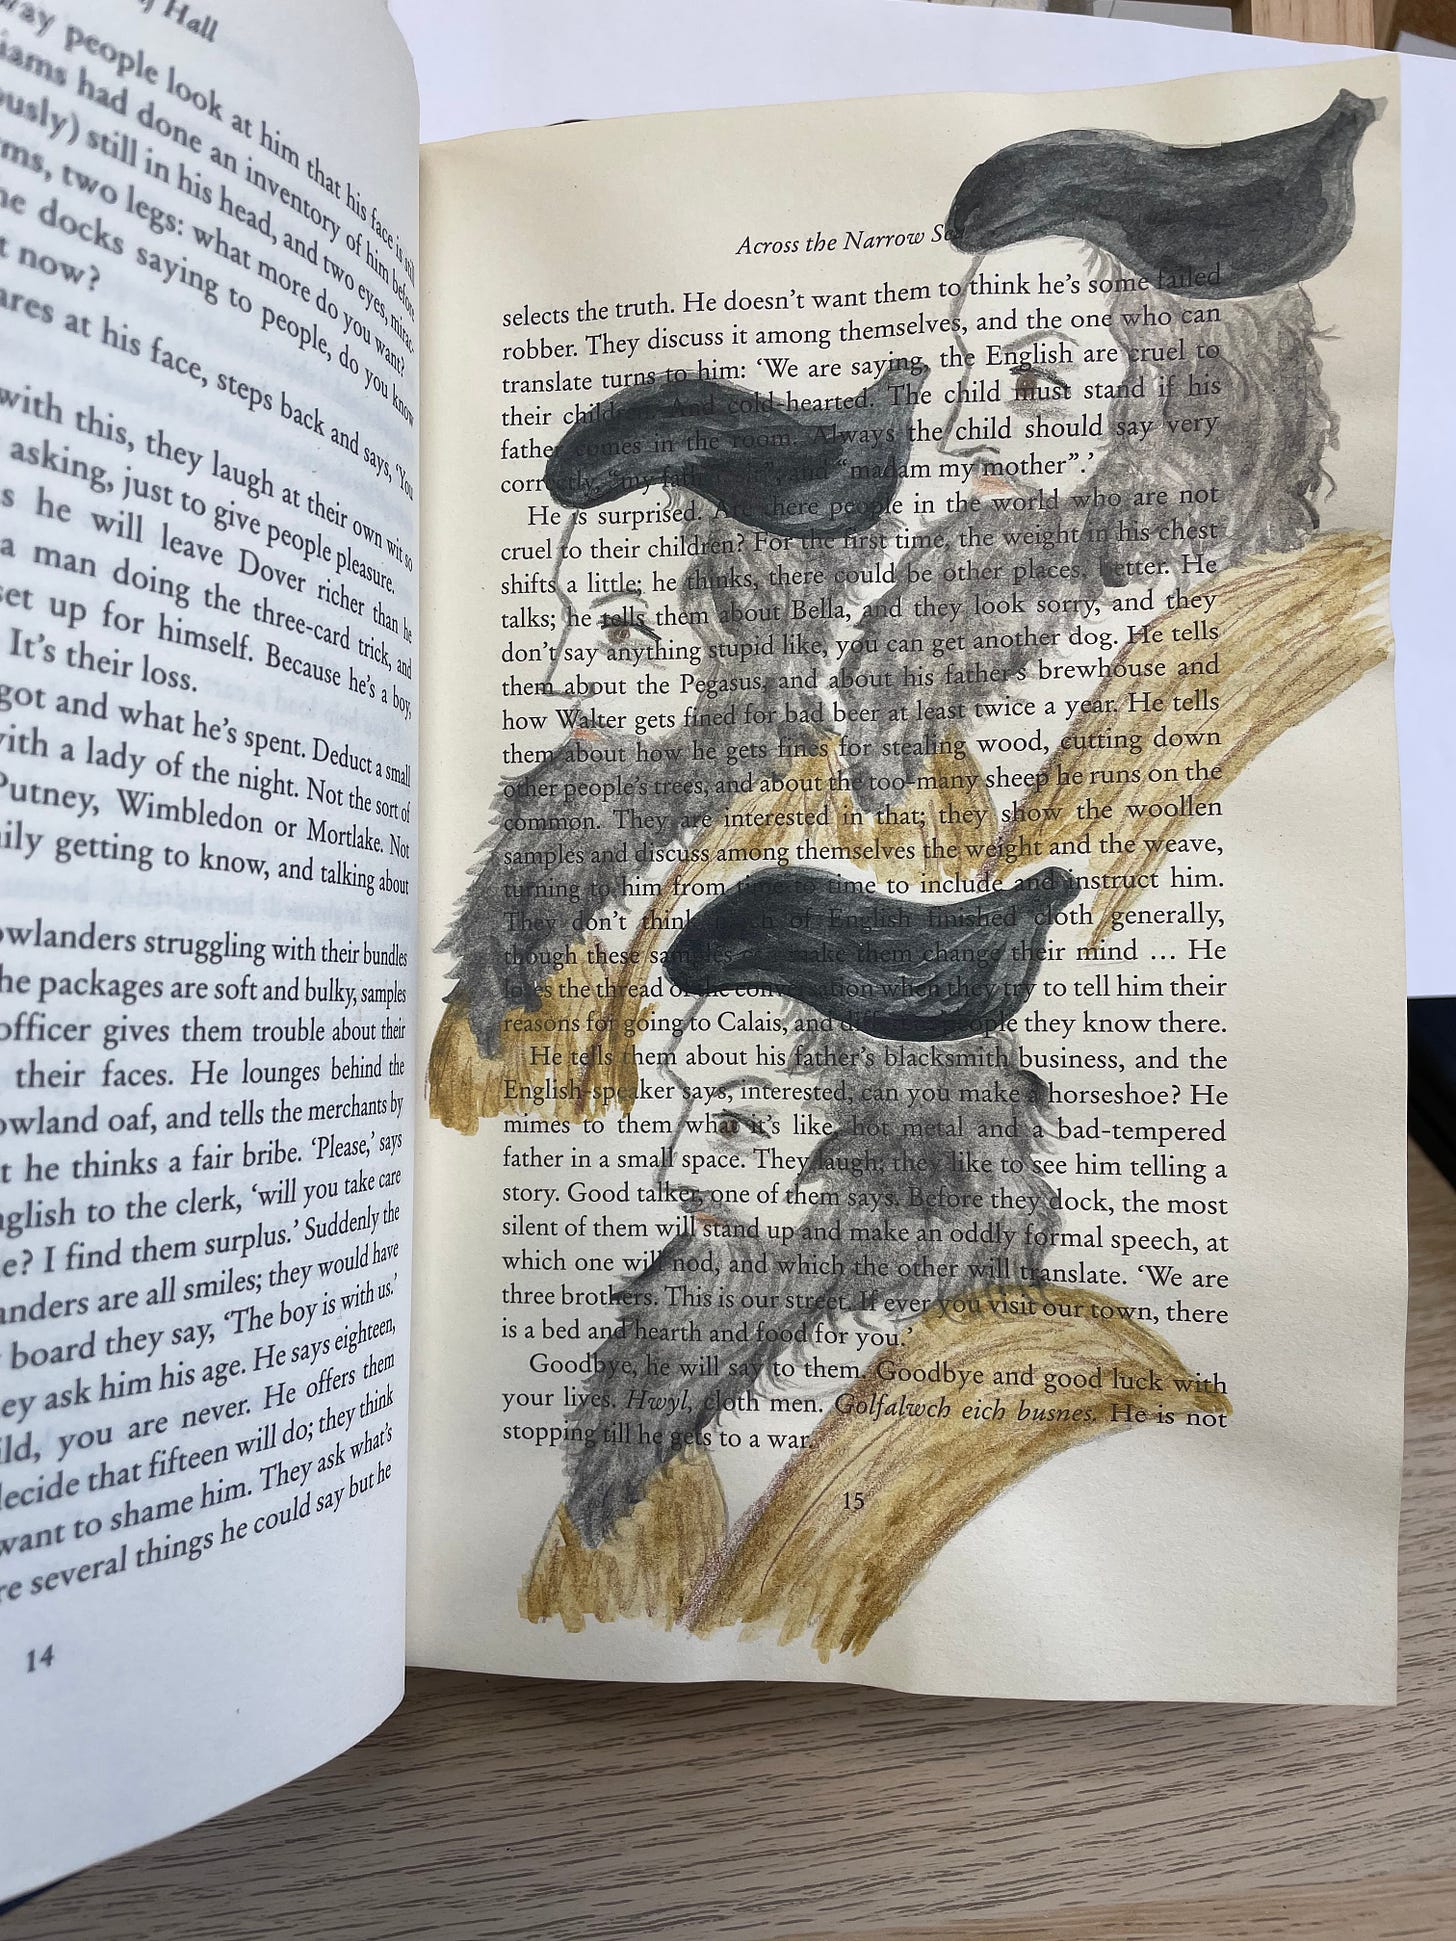 A book containing an illustration painted over the text, of three elderly men in profile.